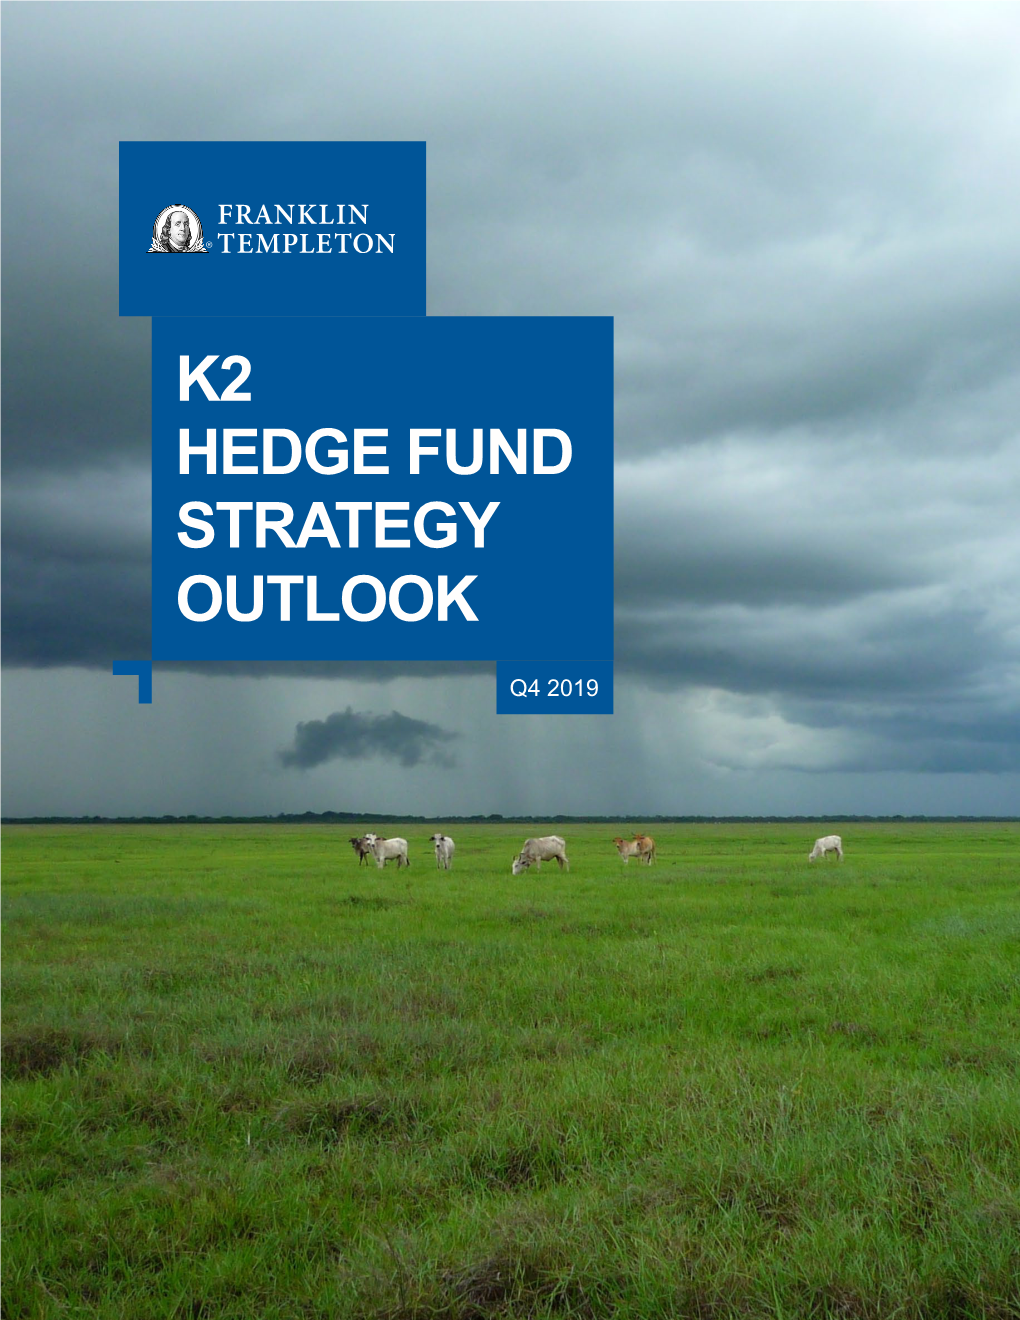 K2 Hedge Fund Strategy Outlook